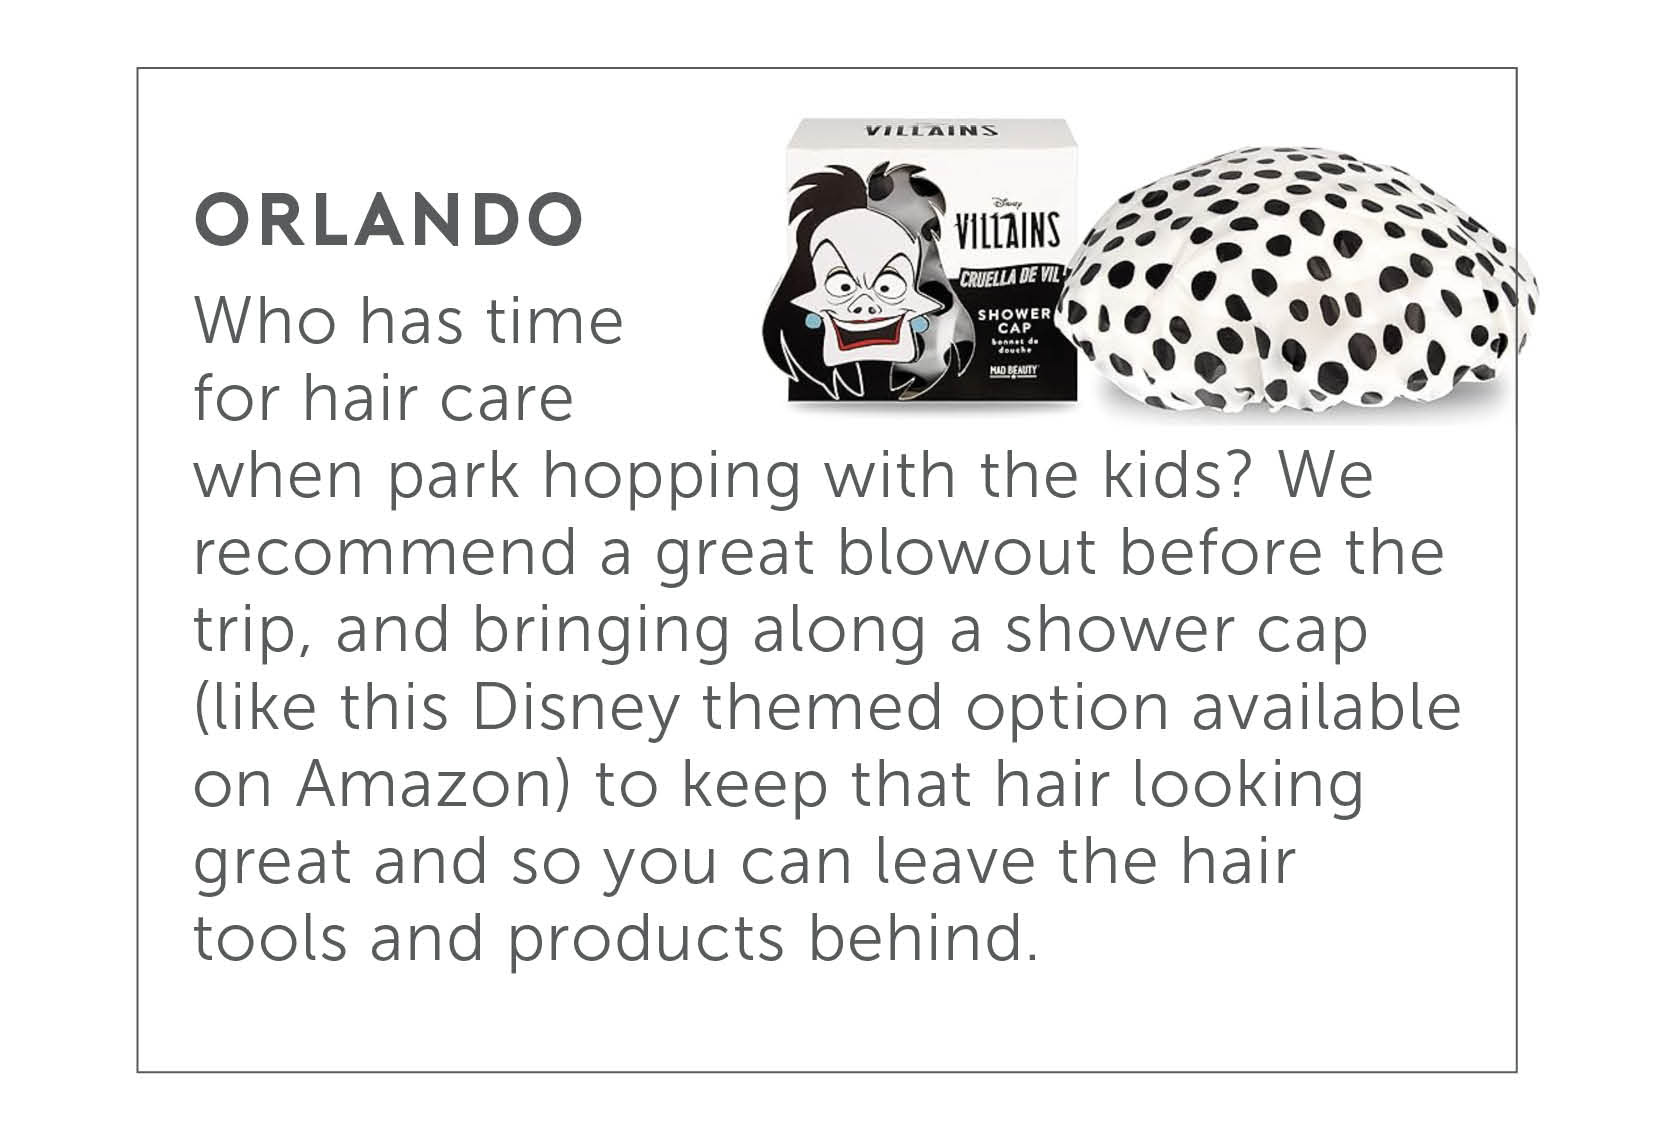 Orlando - Who has time for hair care when park hopping with the kids? We recommend a great blowout before the trip, and bringing along a shower cap (like this Disney themed option available on Amazon) to keep that hair looking great you can leave the hair tools and products behind.